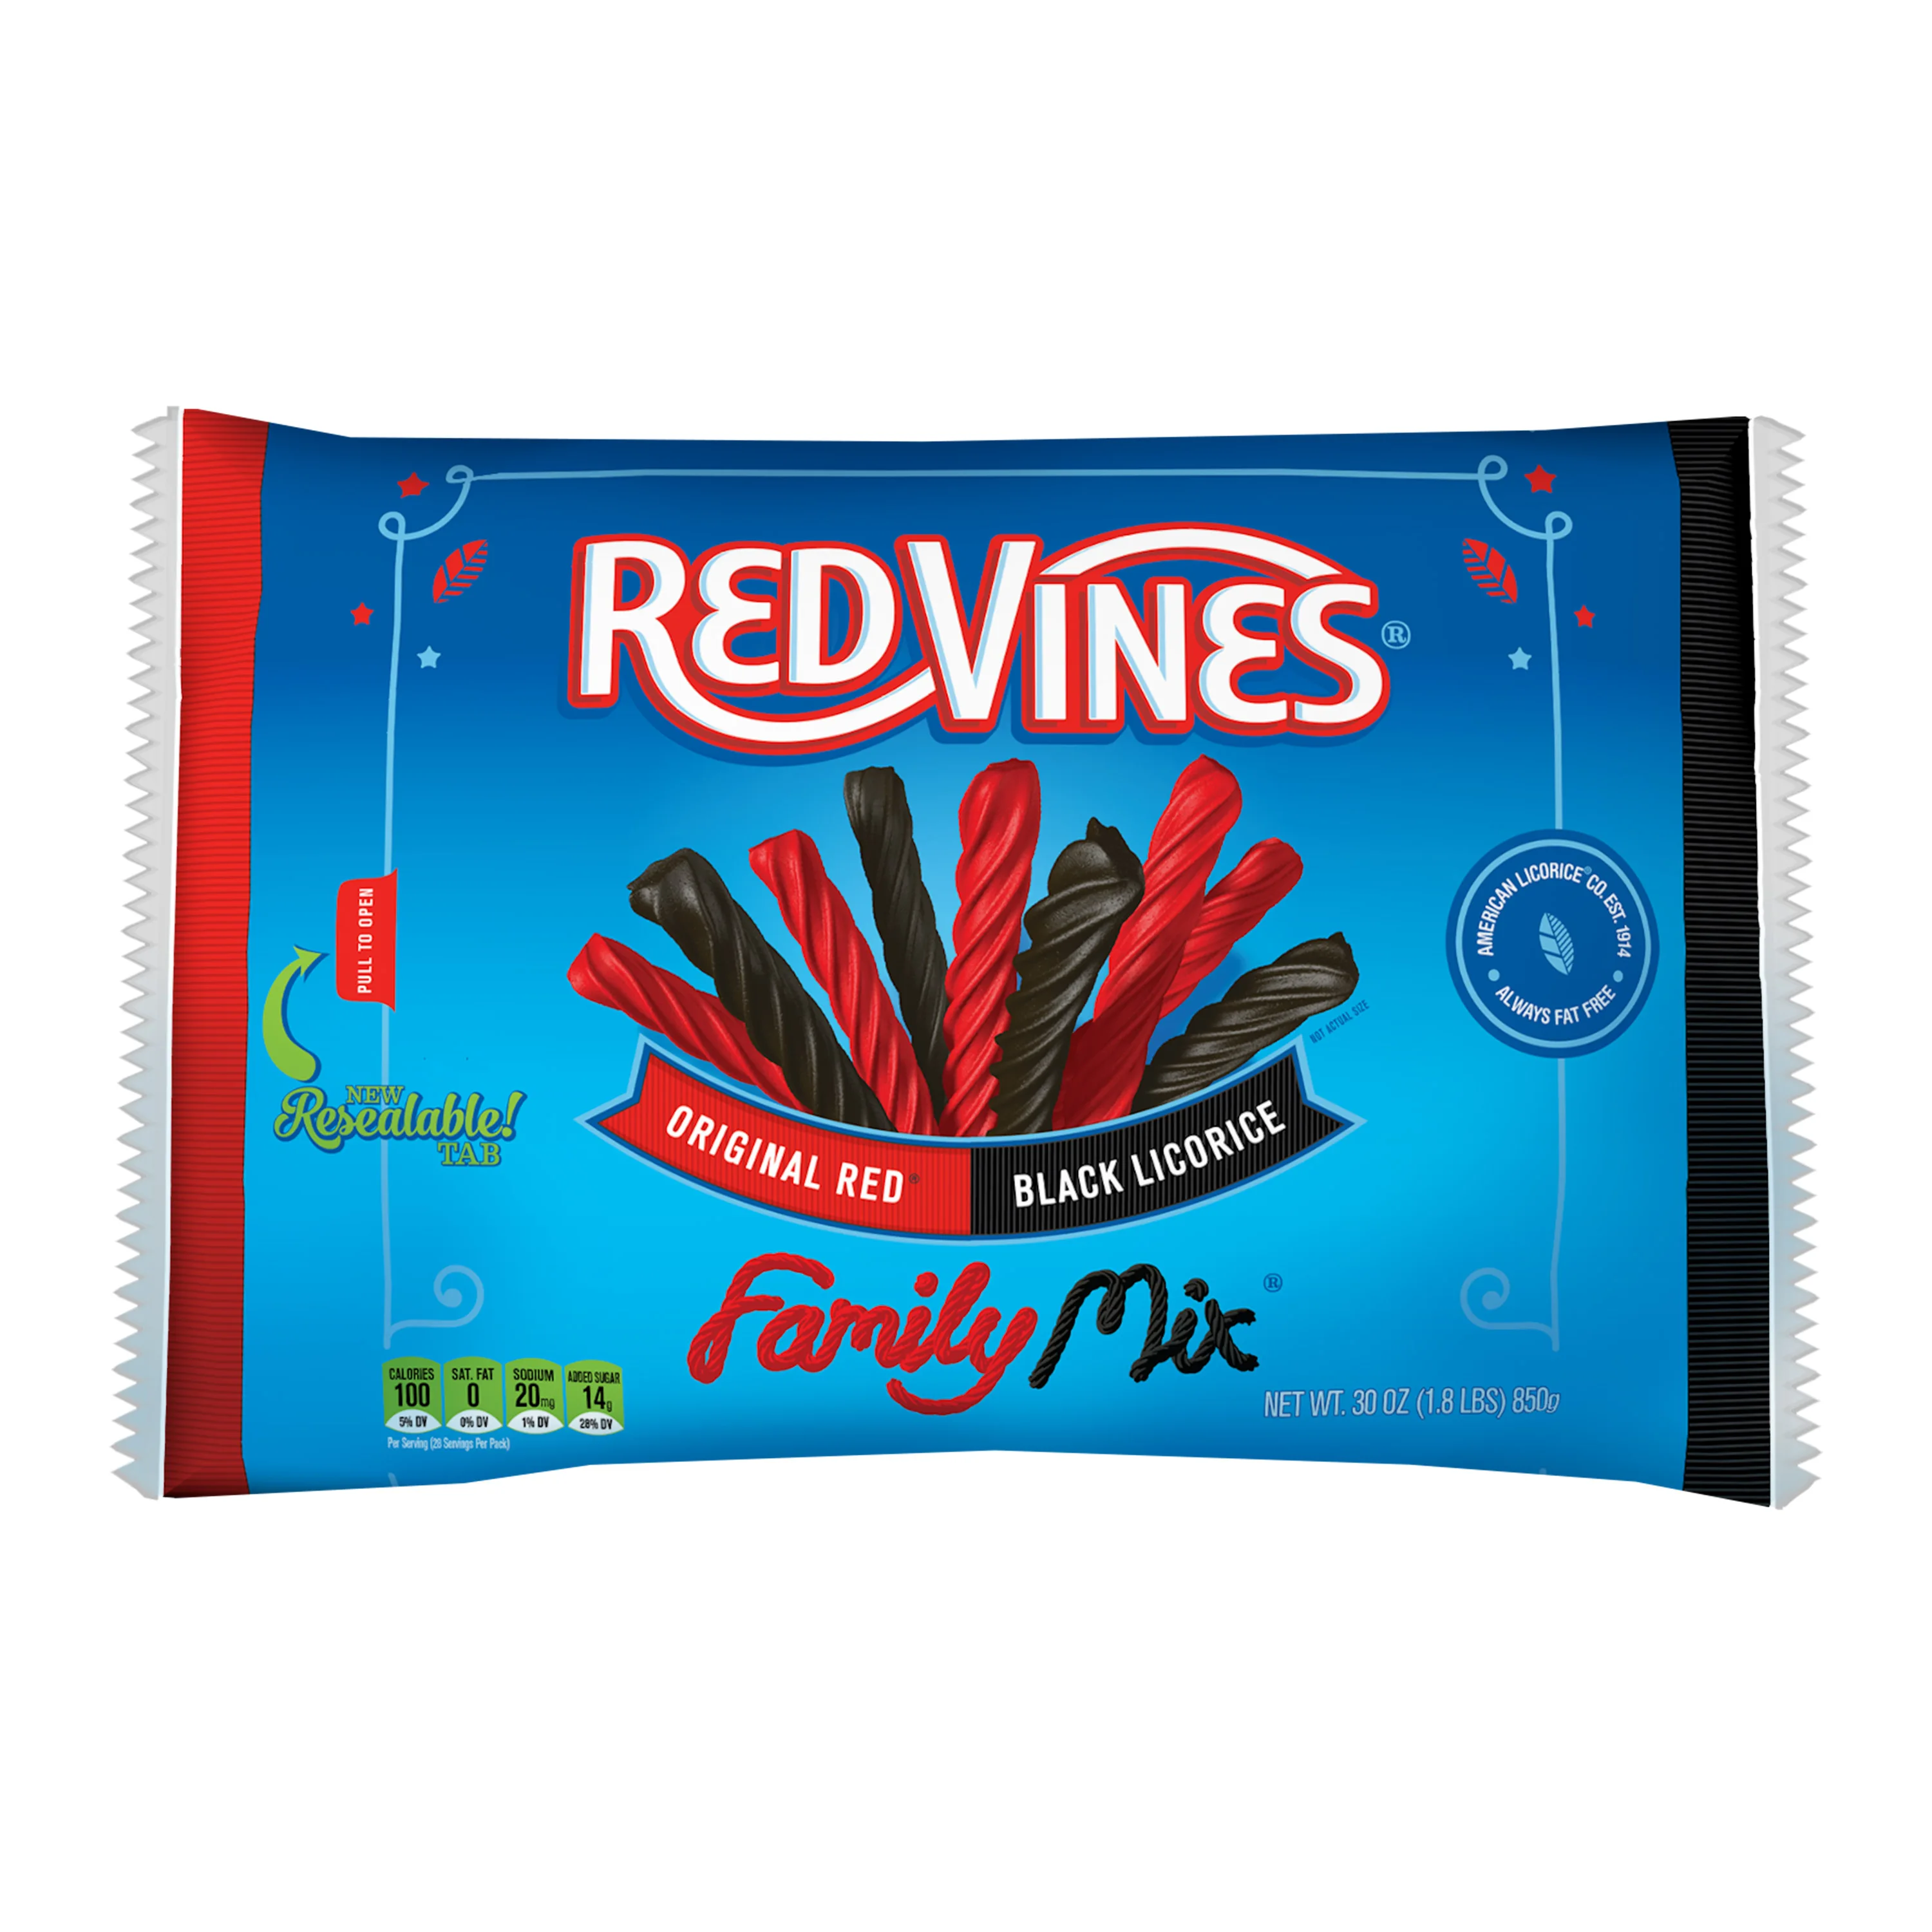 RED VINES Red & Black Licorice Family Mix, 30oz Bag